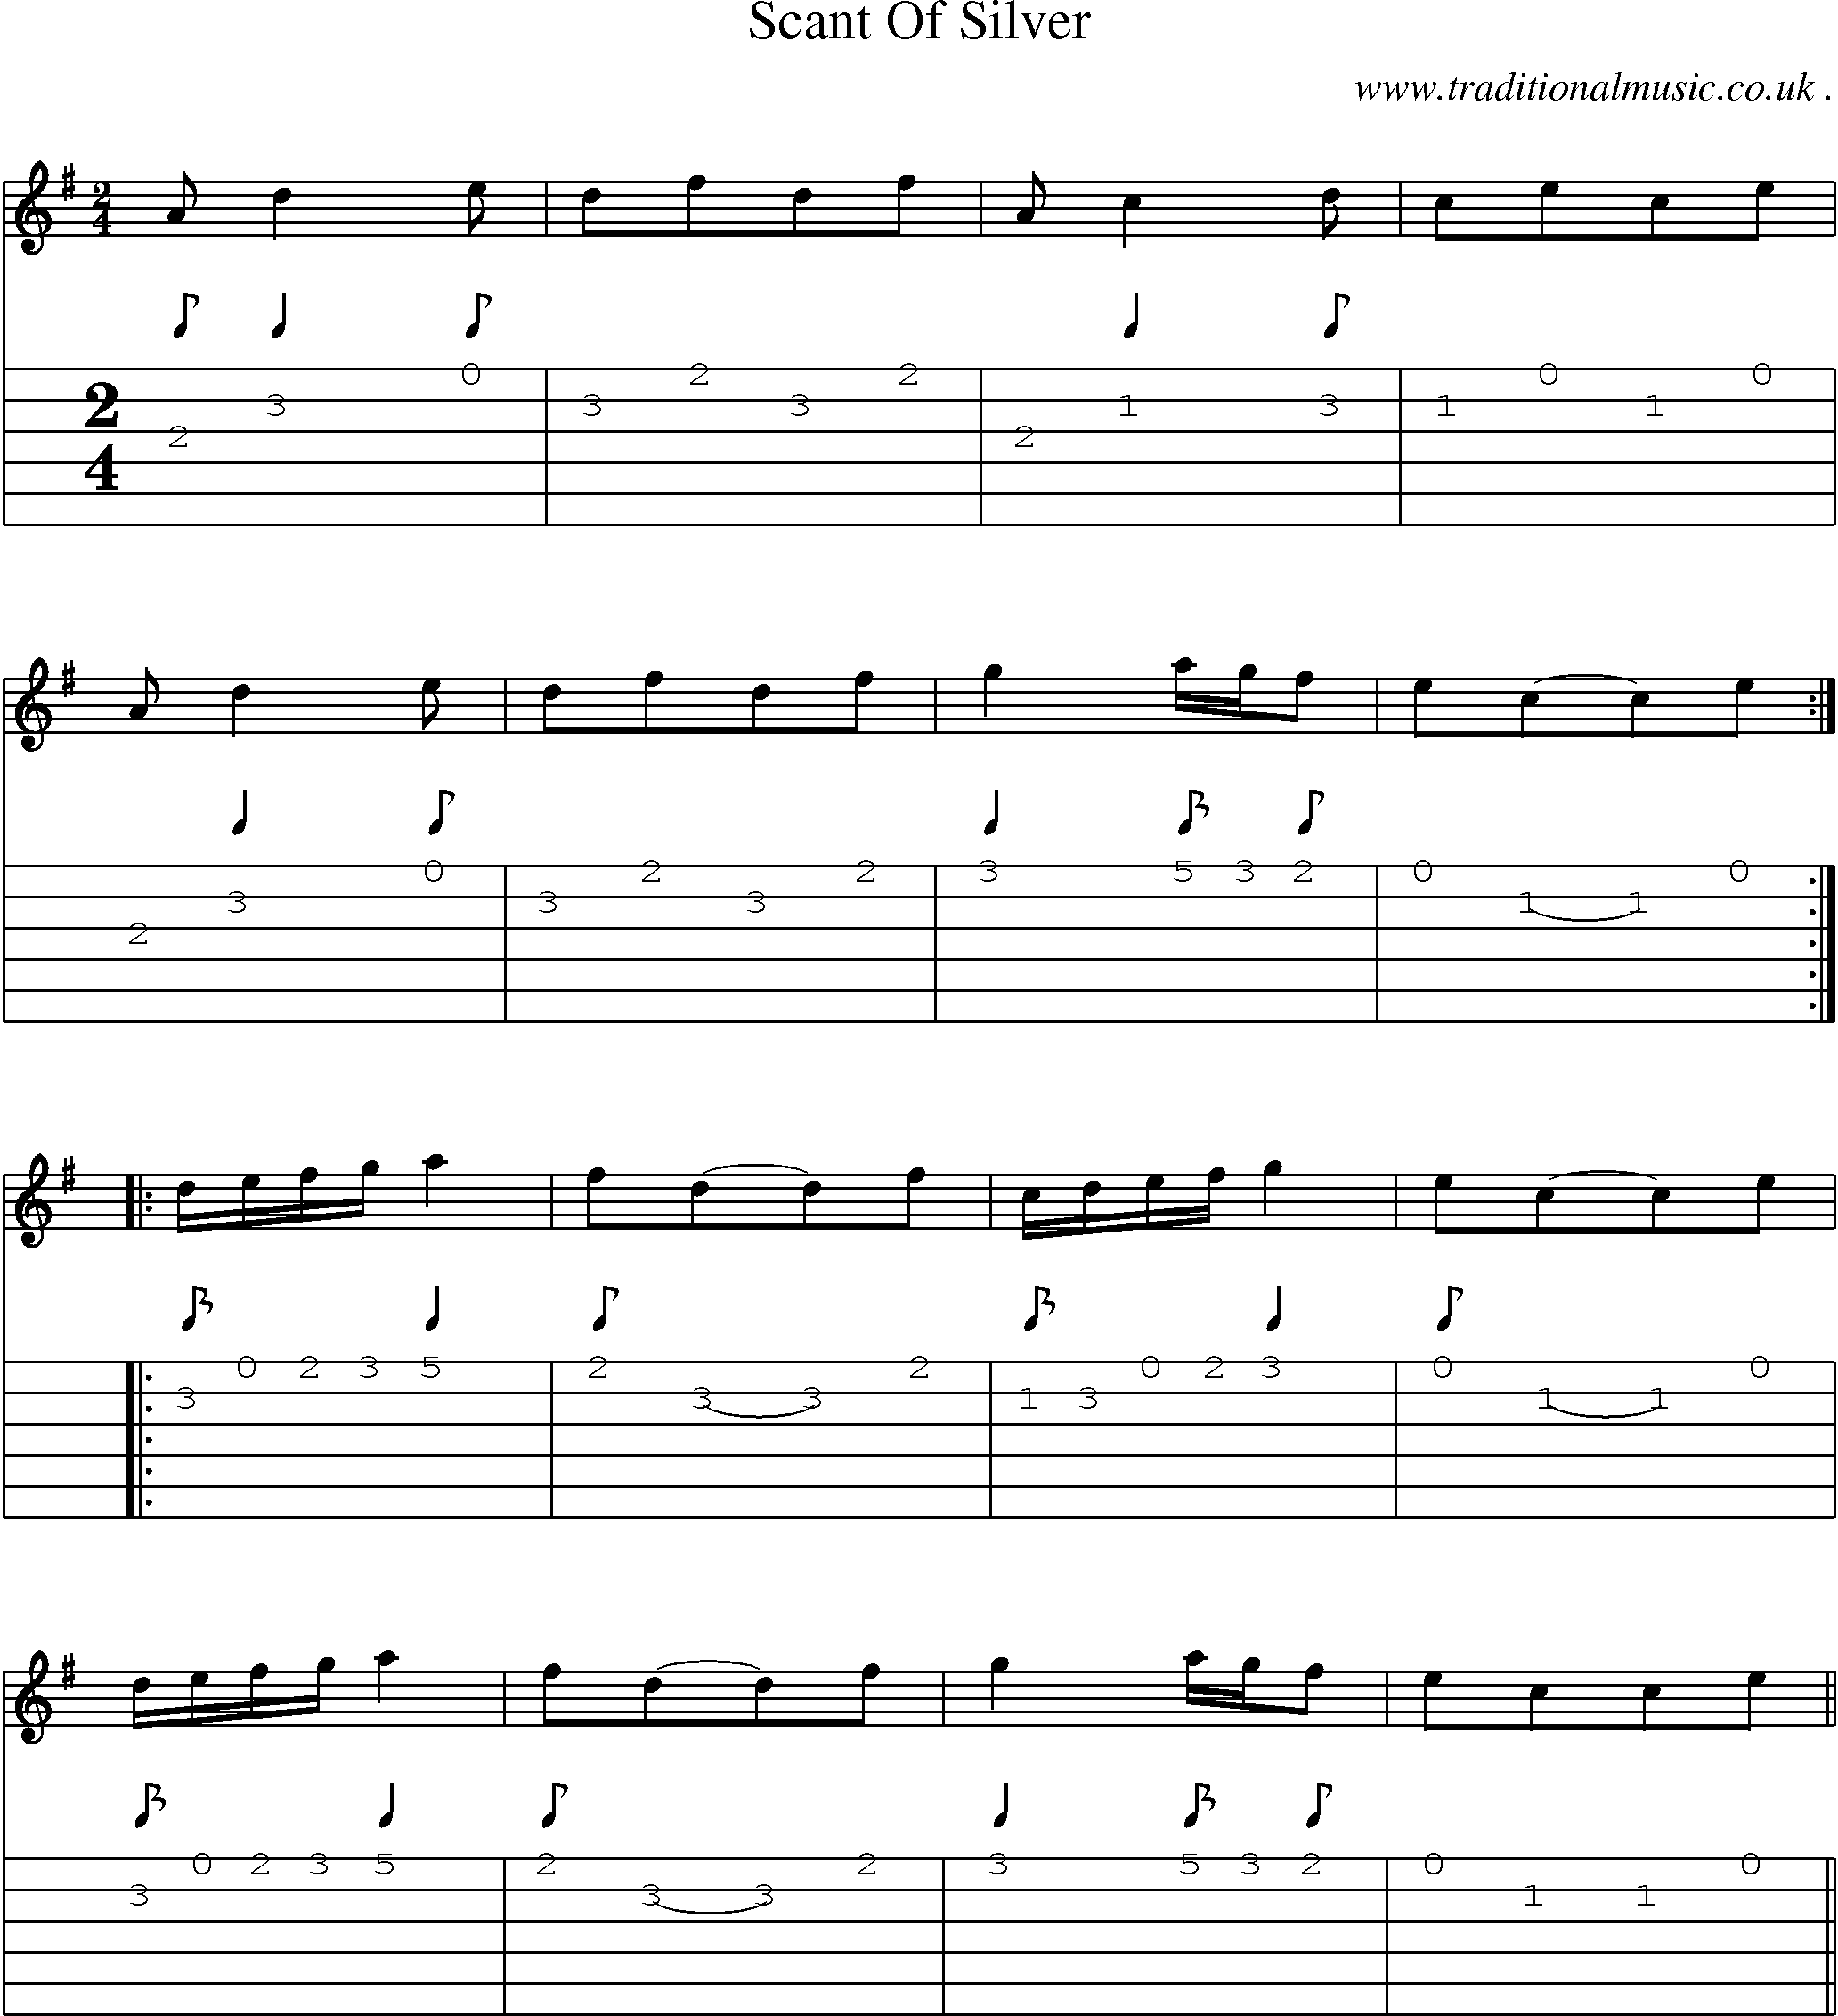 Sheet-Music and Guitar Tabs for Scant Of Silver